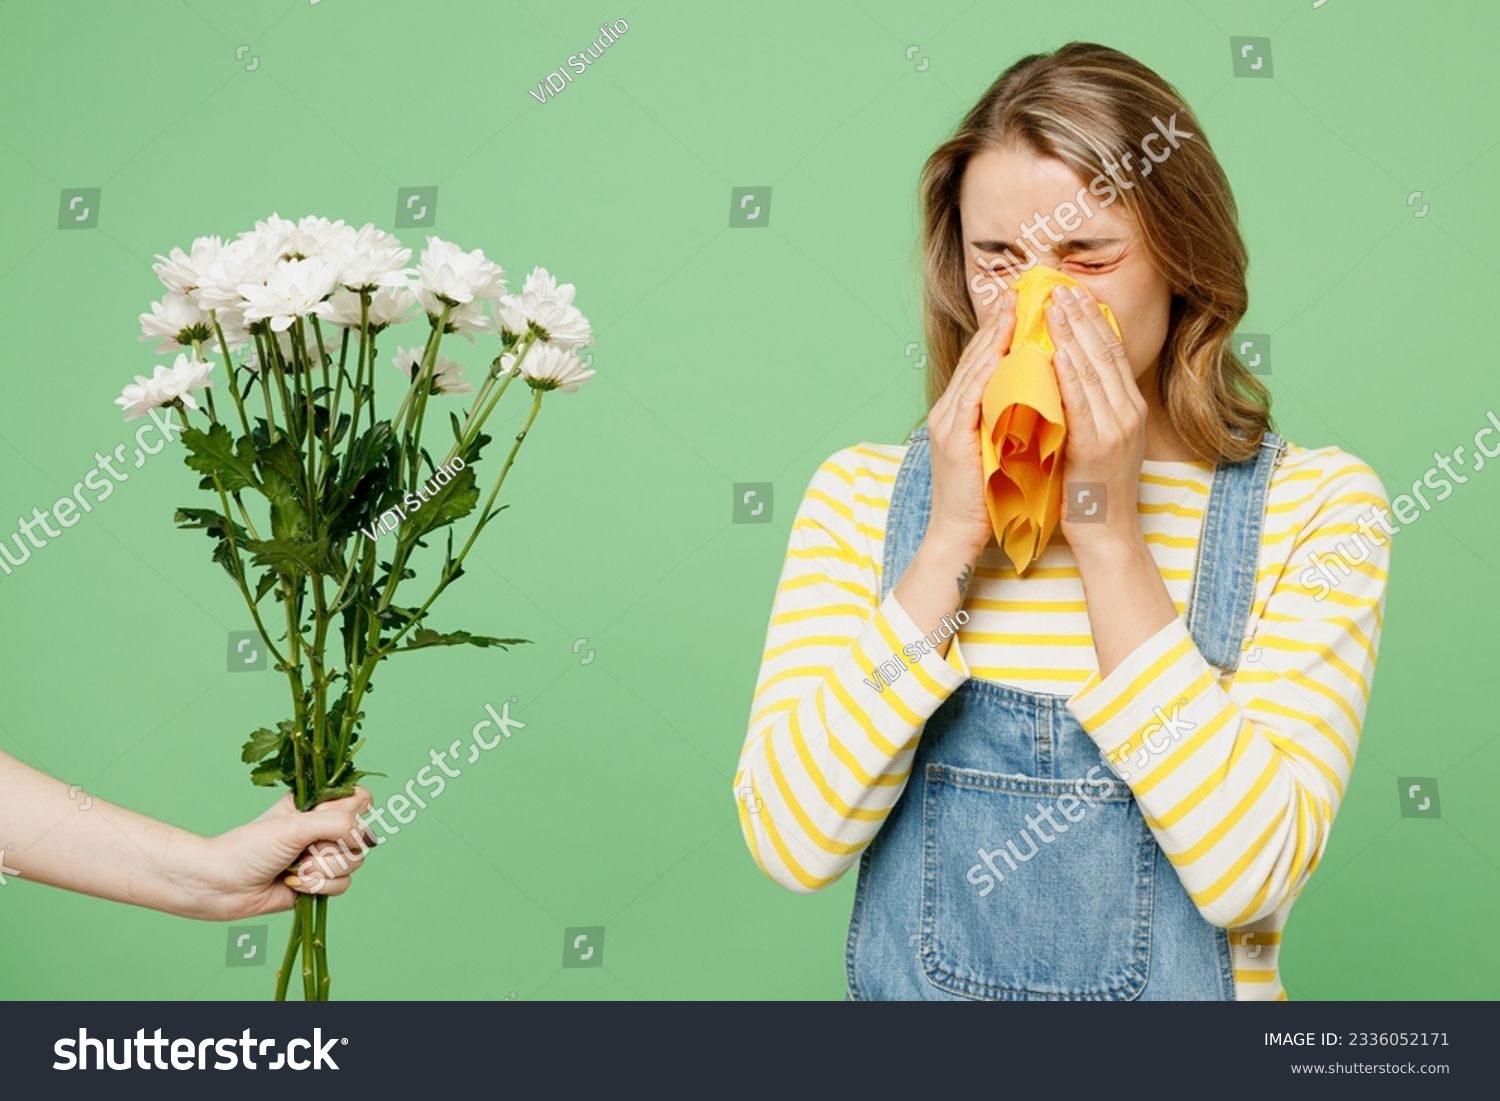 Sick unhealthy ill allergic woman has red watery eyes suffer from allergy trigger symptoms hay fever hold napkin flowers blow runny stuffy sore nose isolated on plain green background studio portrait #2336052171